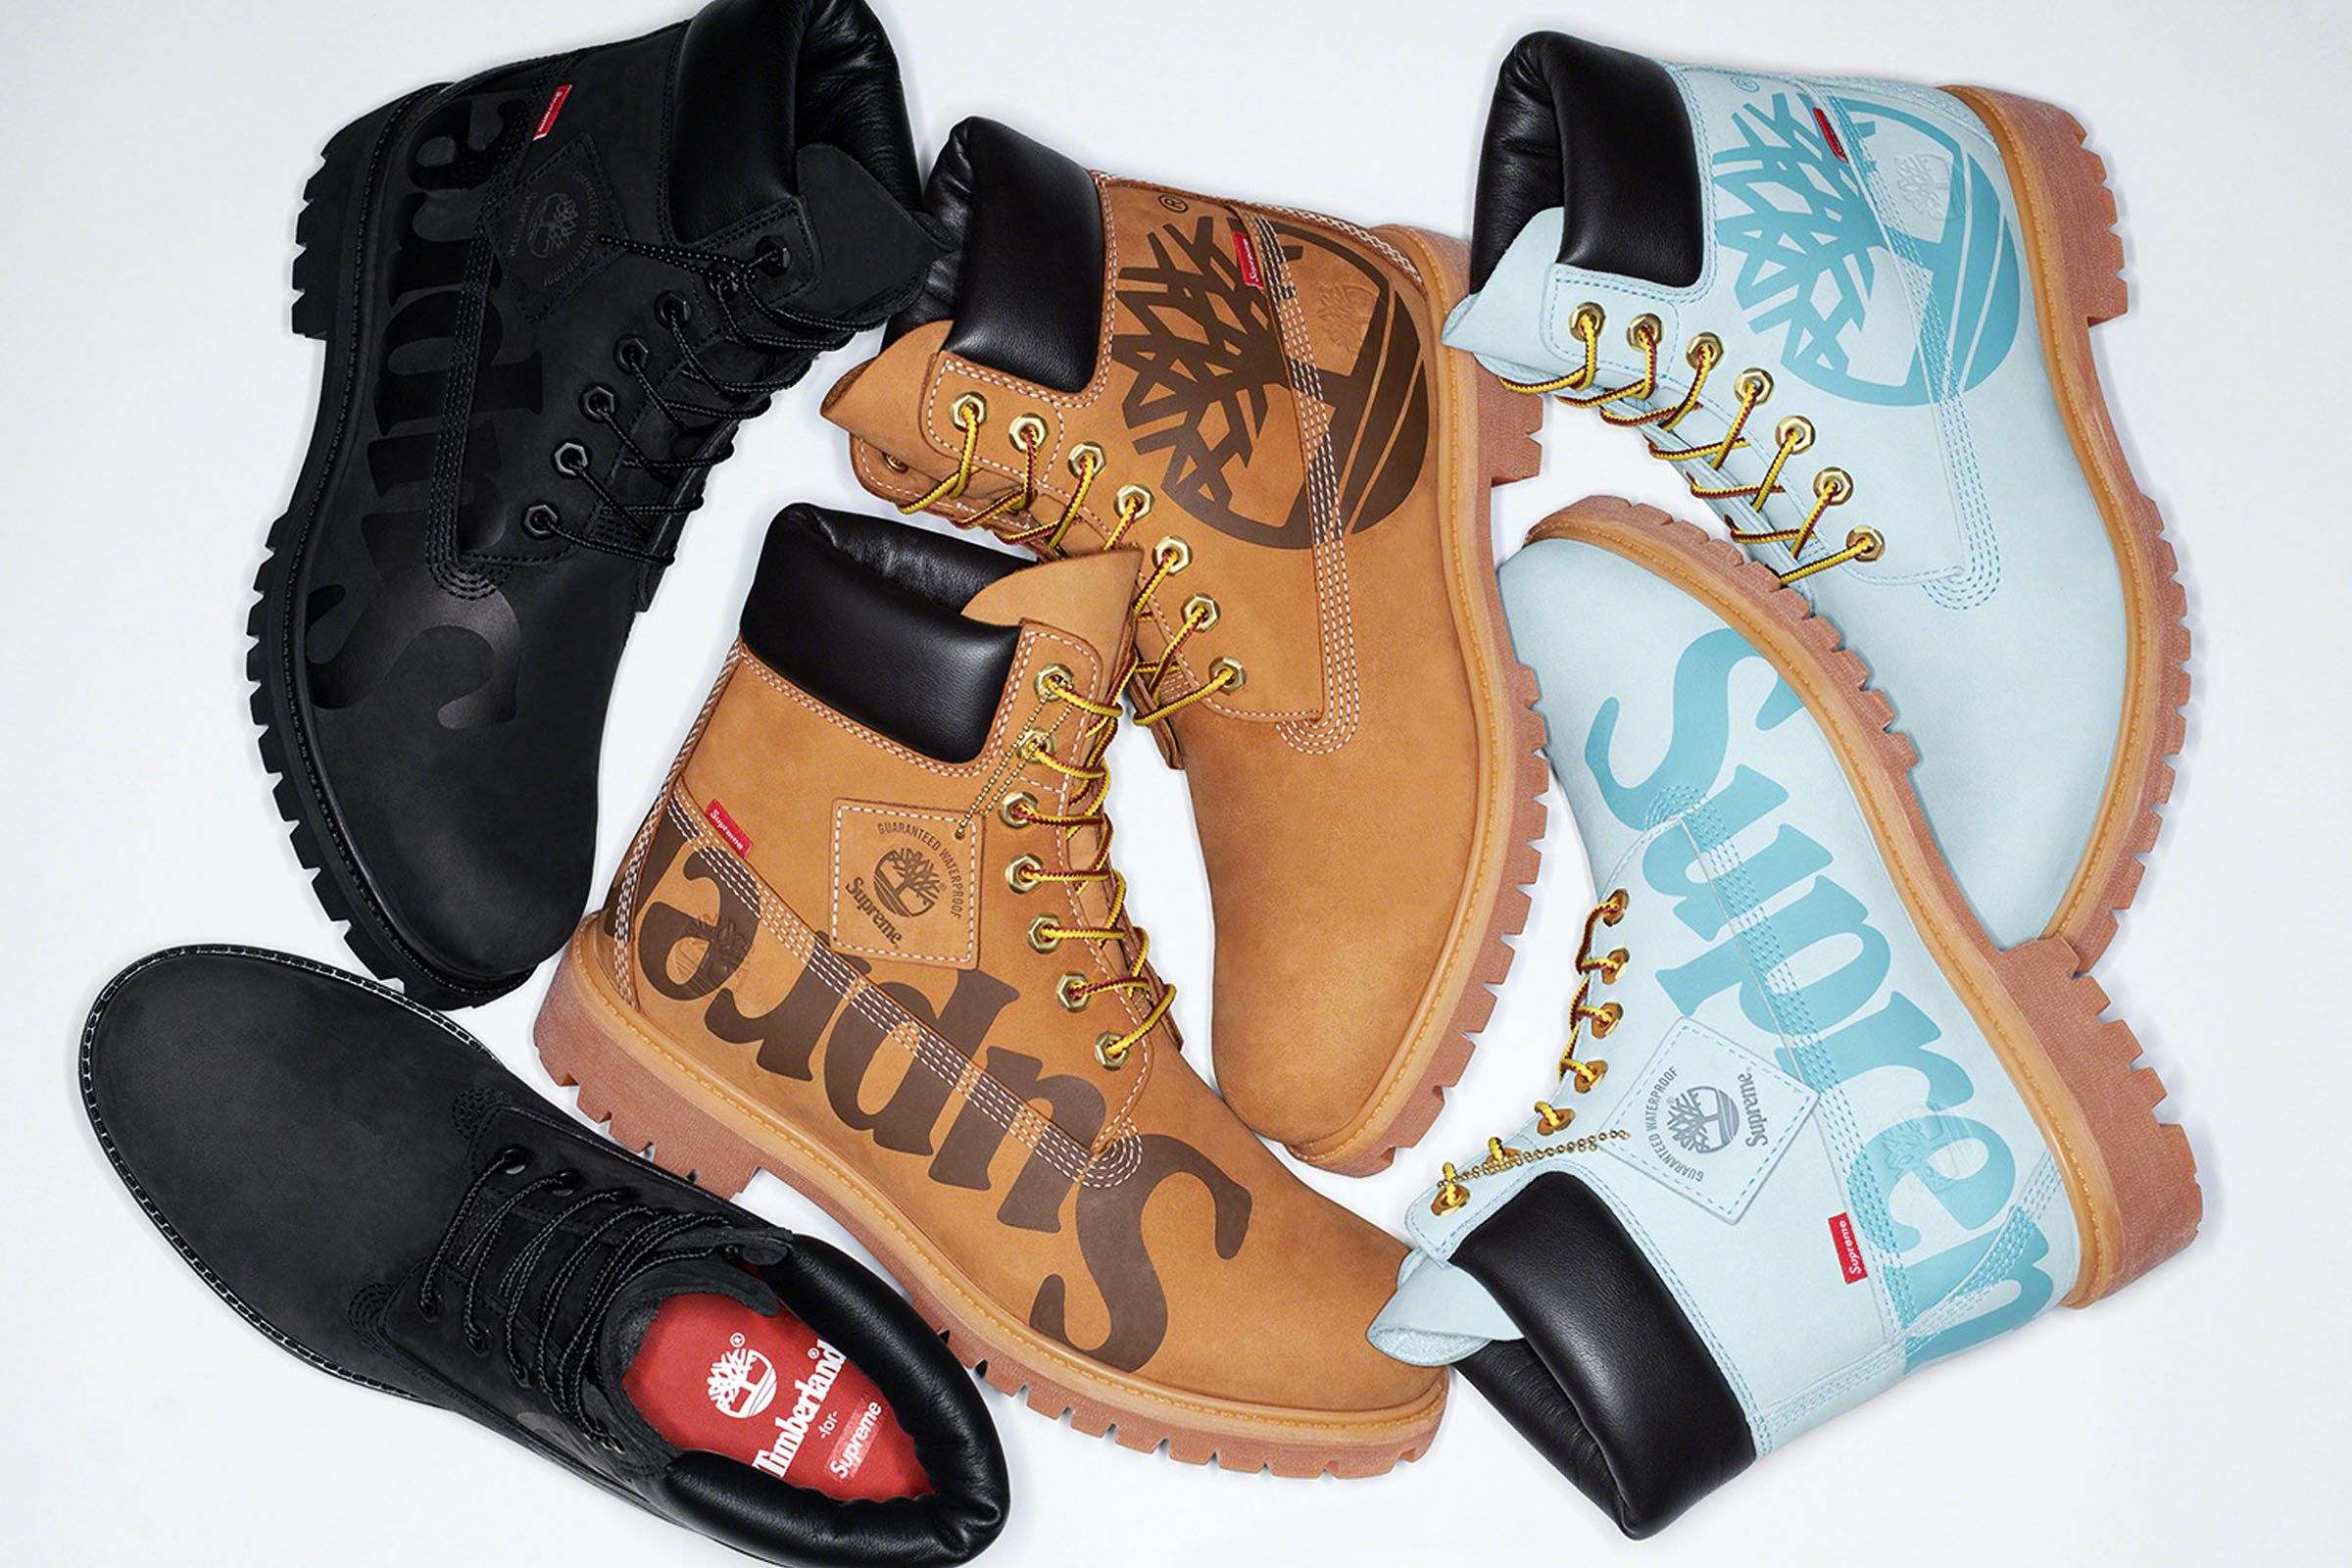 Supreme x Timberland 2016 Fall Winter Field Boot and Apparel Collection